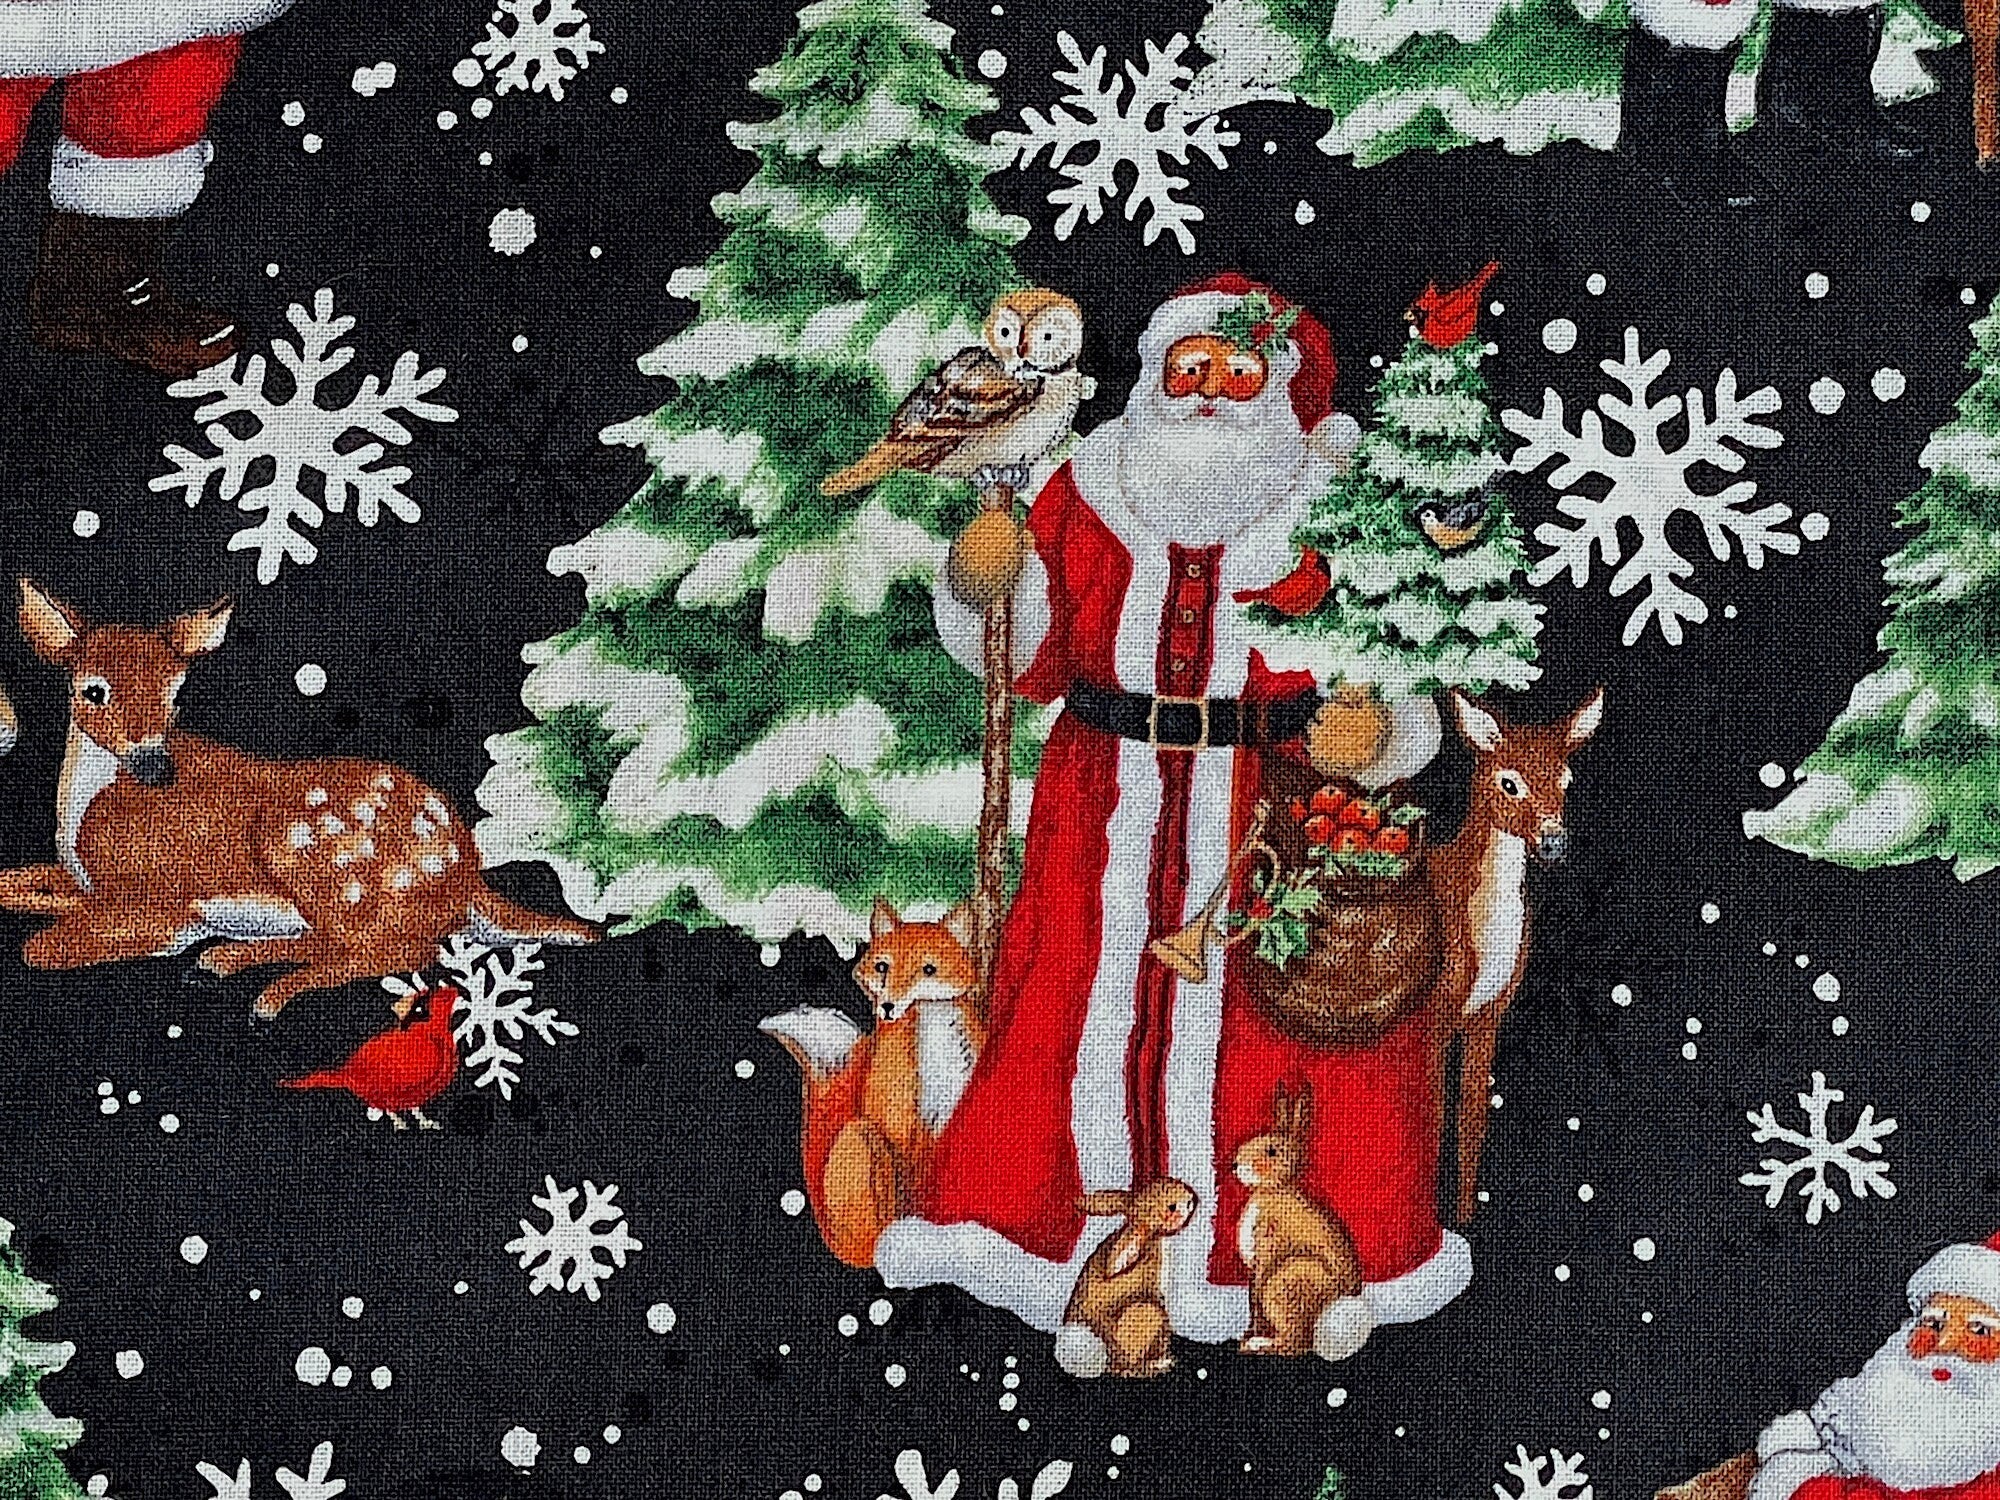 Santa with and owl, reindeer, fox and more.